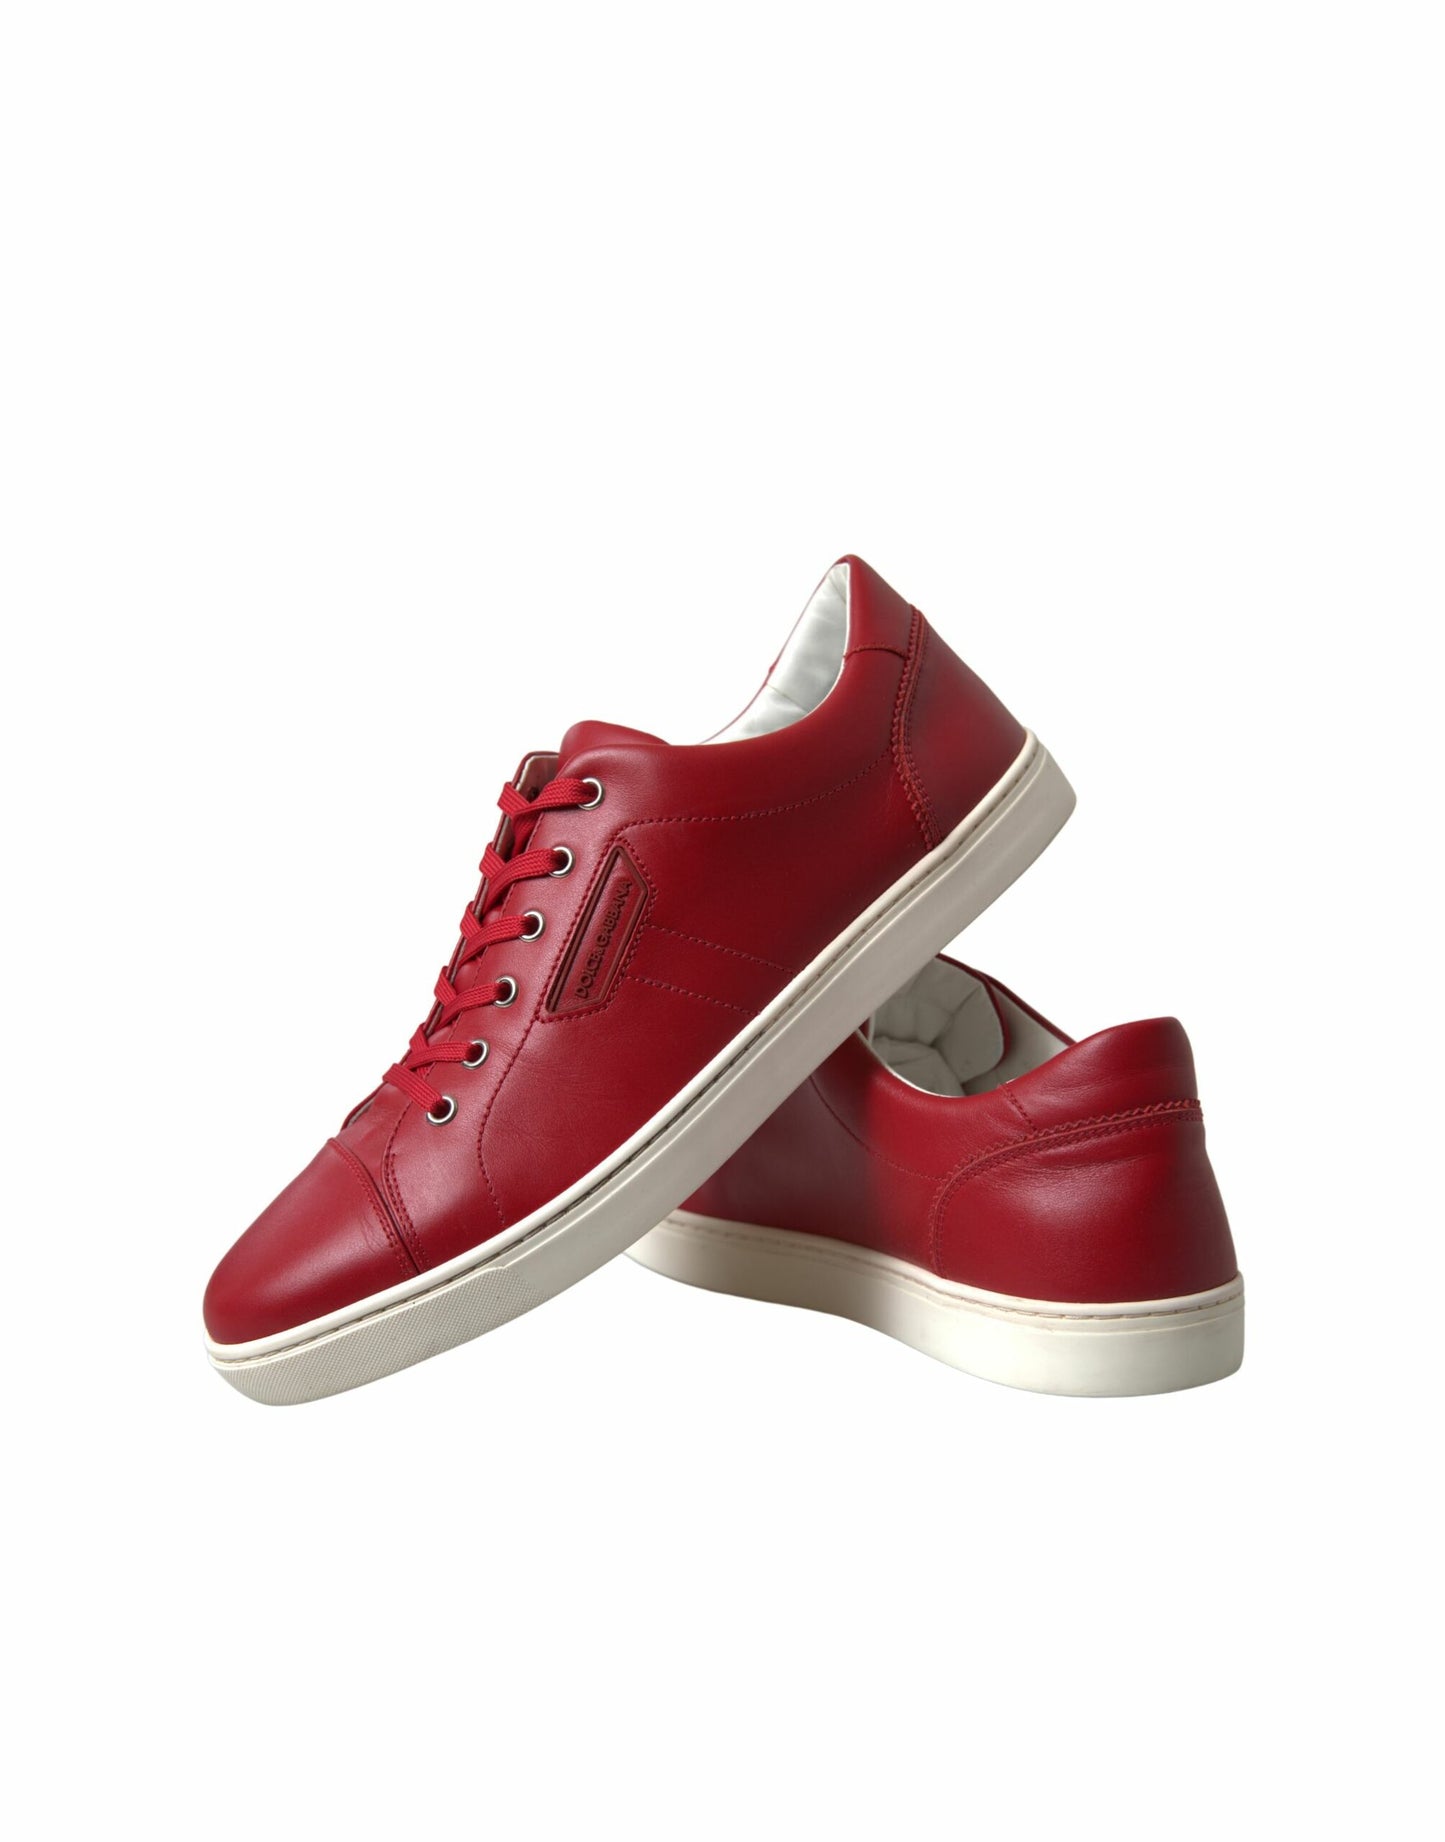 Dolce & Gabbana Elegant Red Leather Low Top Sneakers